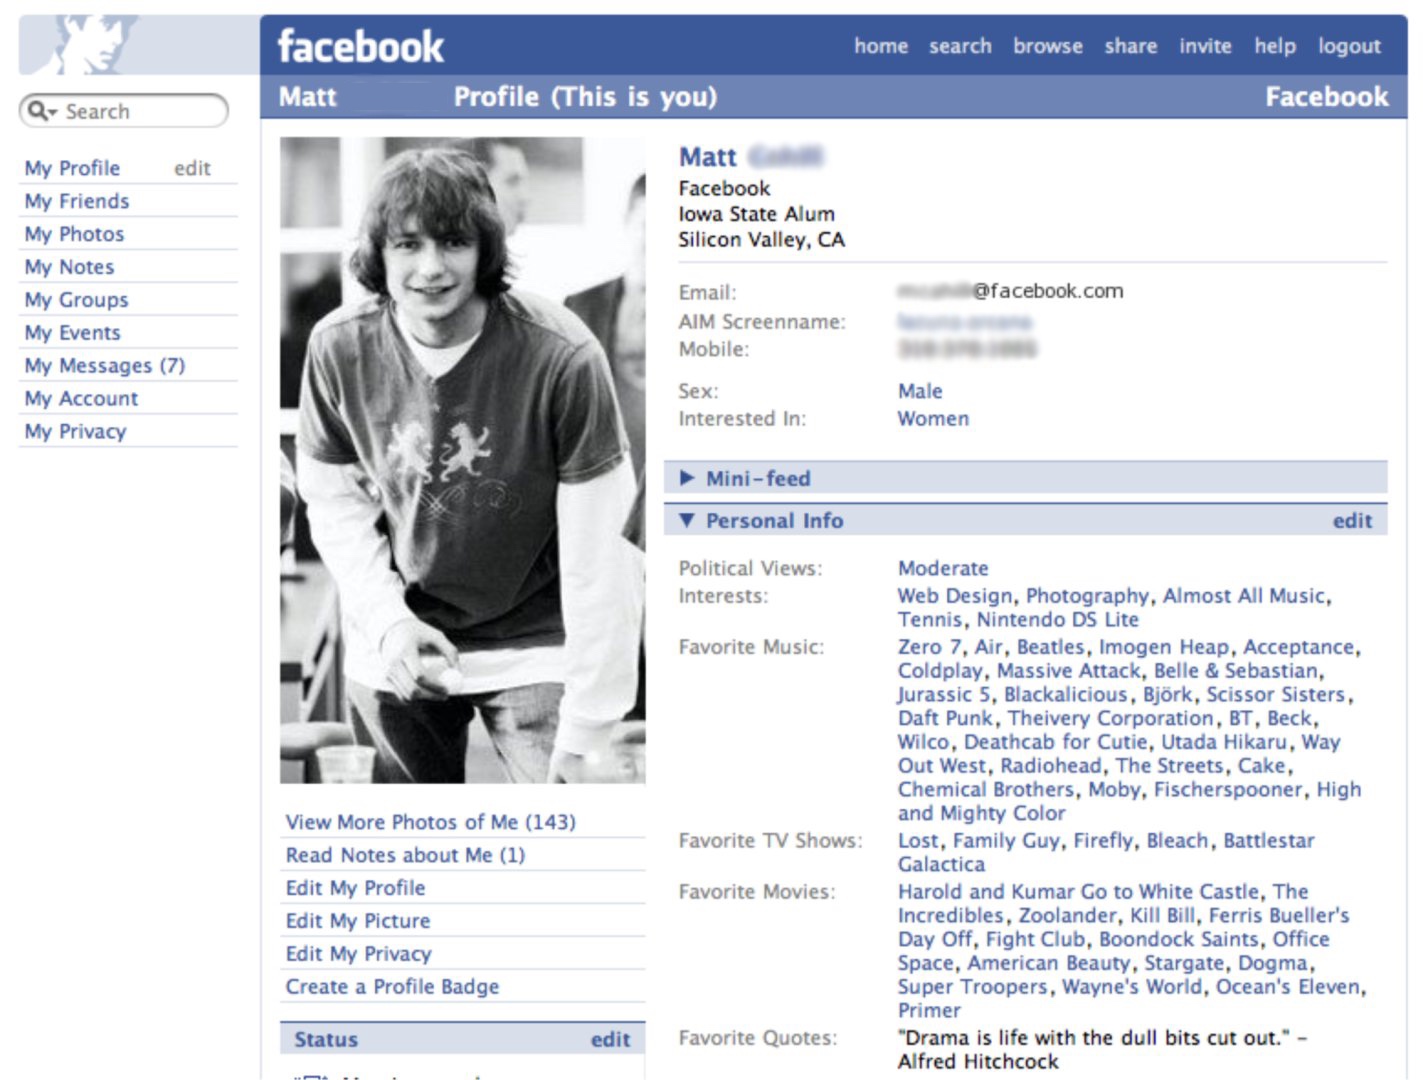 Profile page post-redesign and removal of "The" (2005)